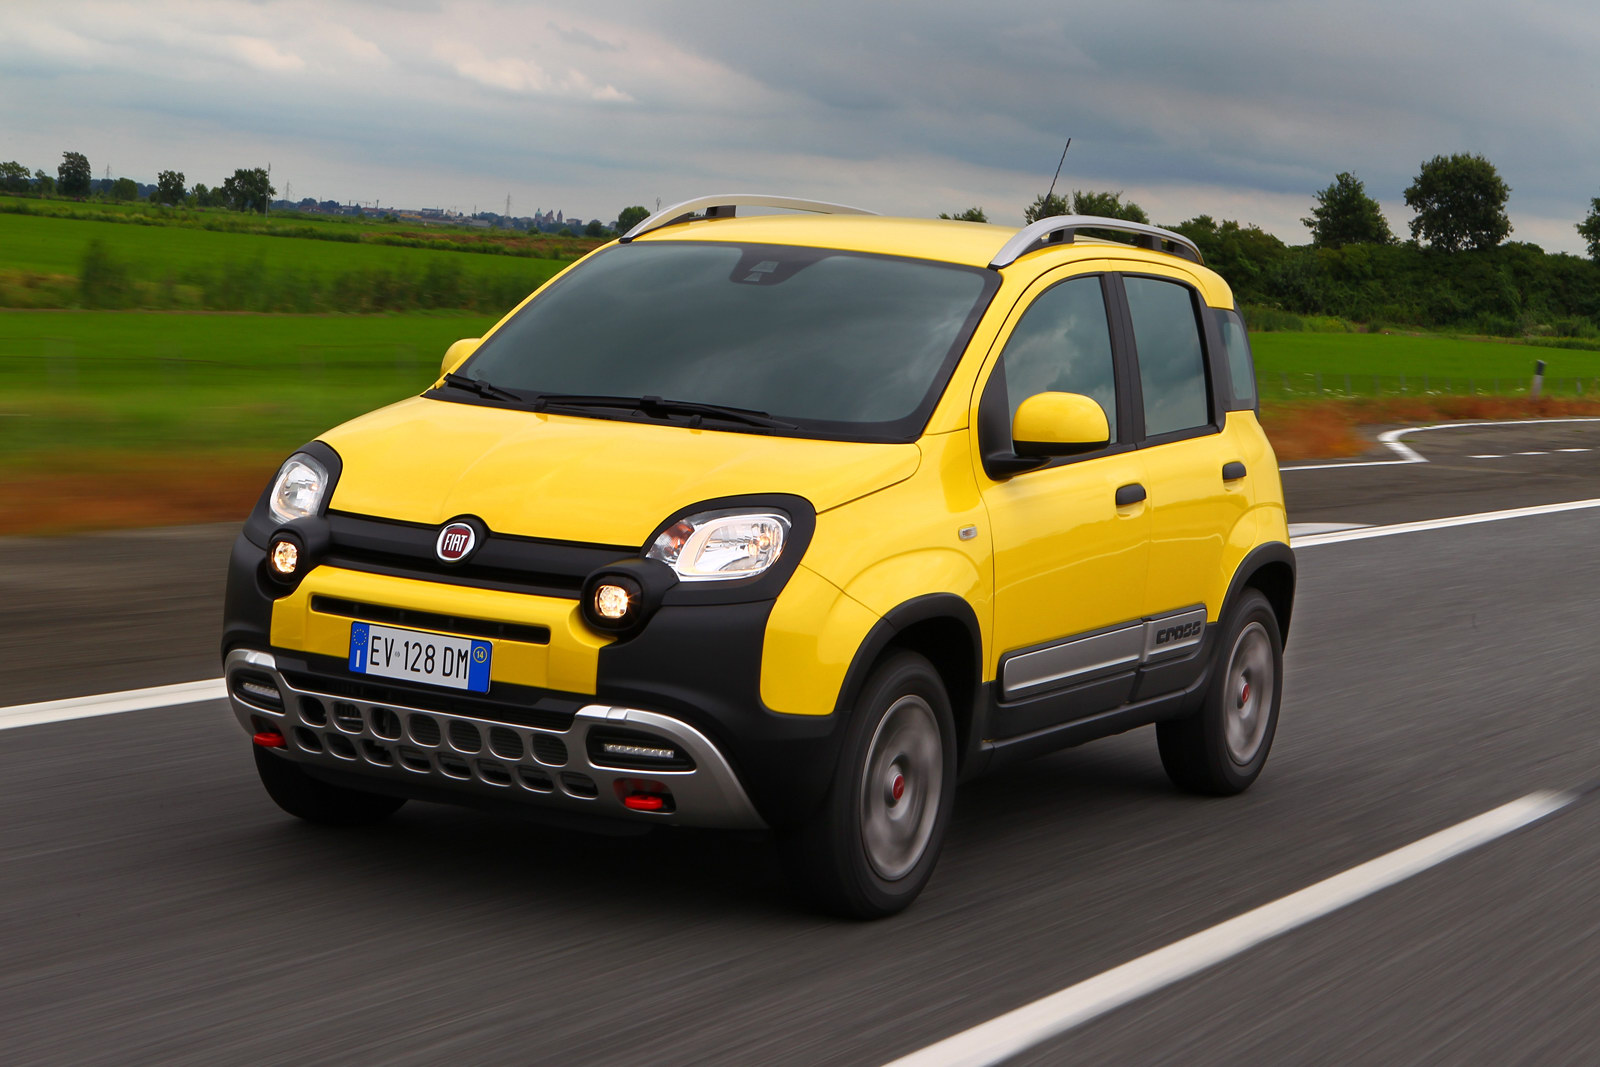 Fiat Details Panda Cross, the SUV for the City [72 Photos